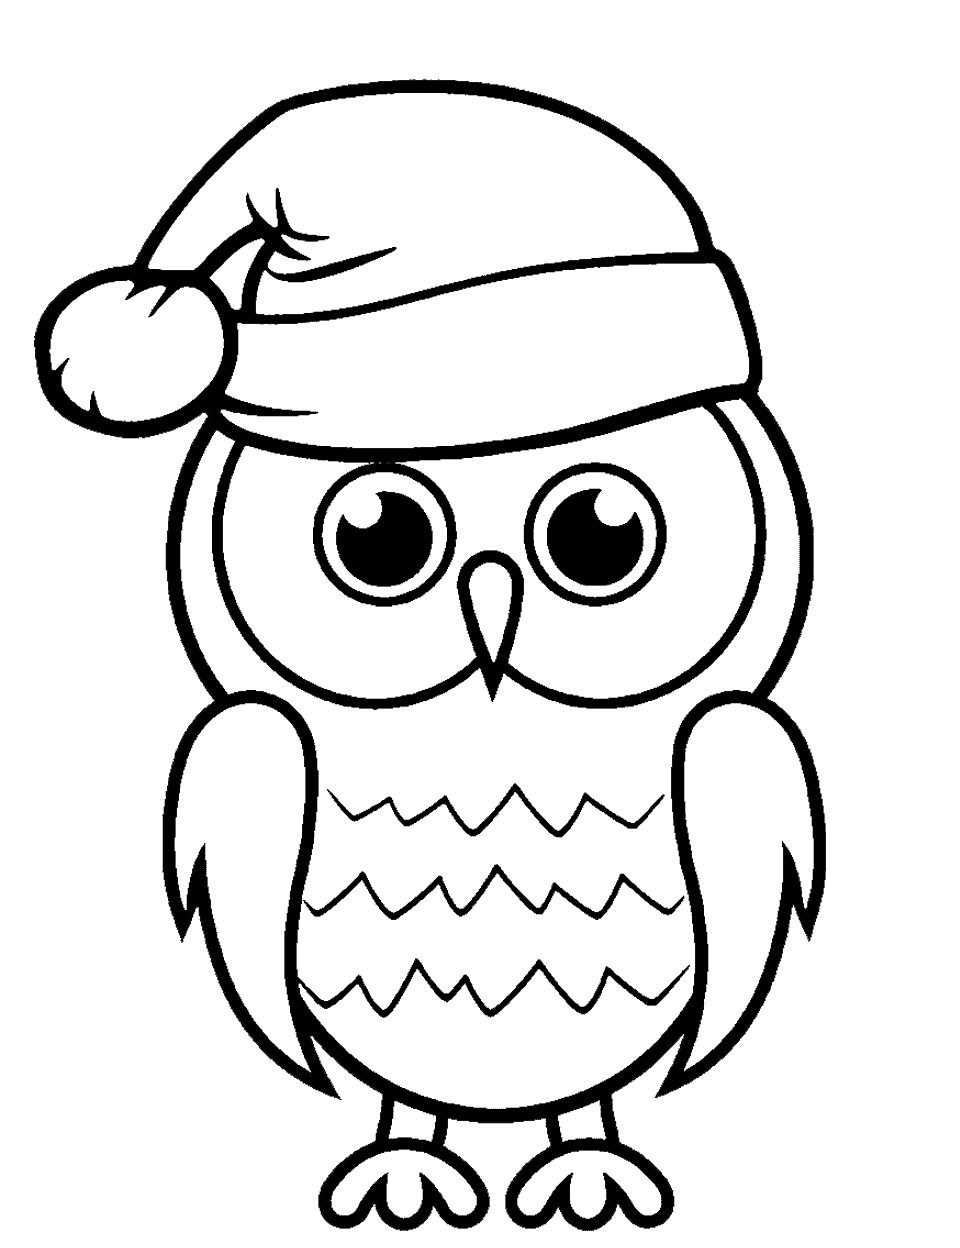 Owl in a Santa Hat Coloring Page - An owl wearing a Santa hat, perfect for Christmas.